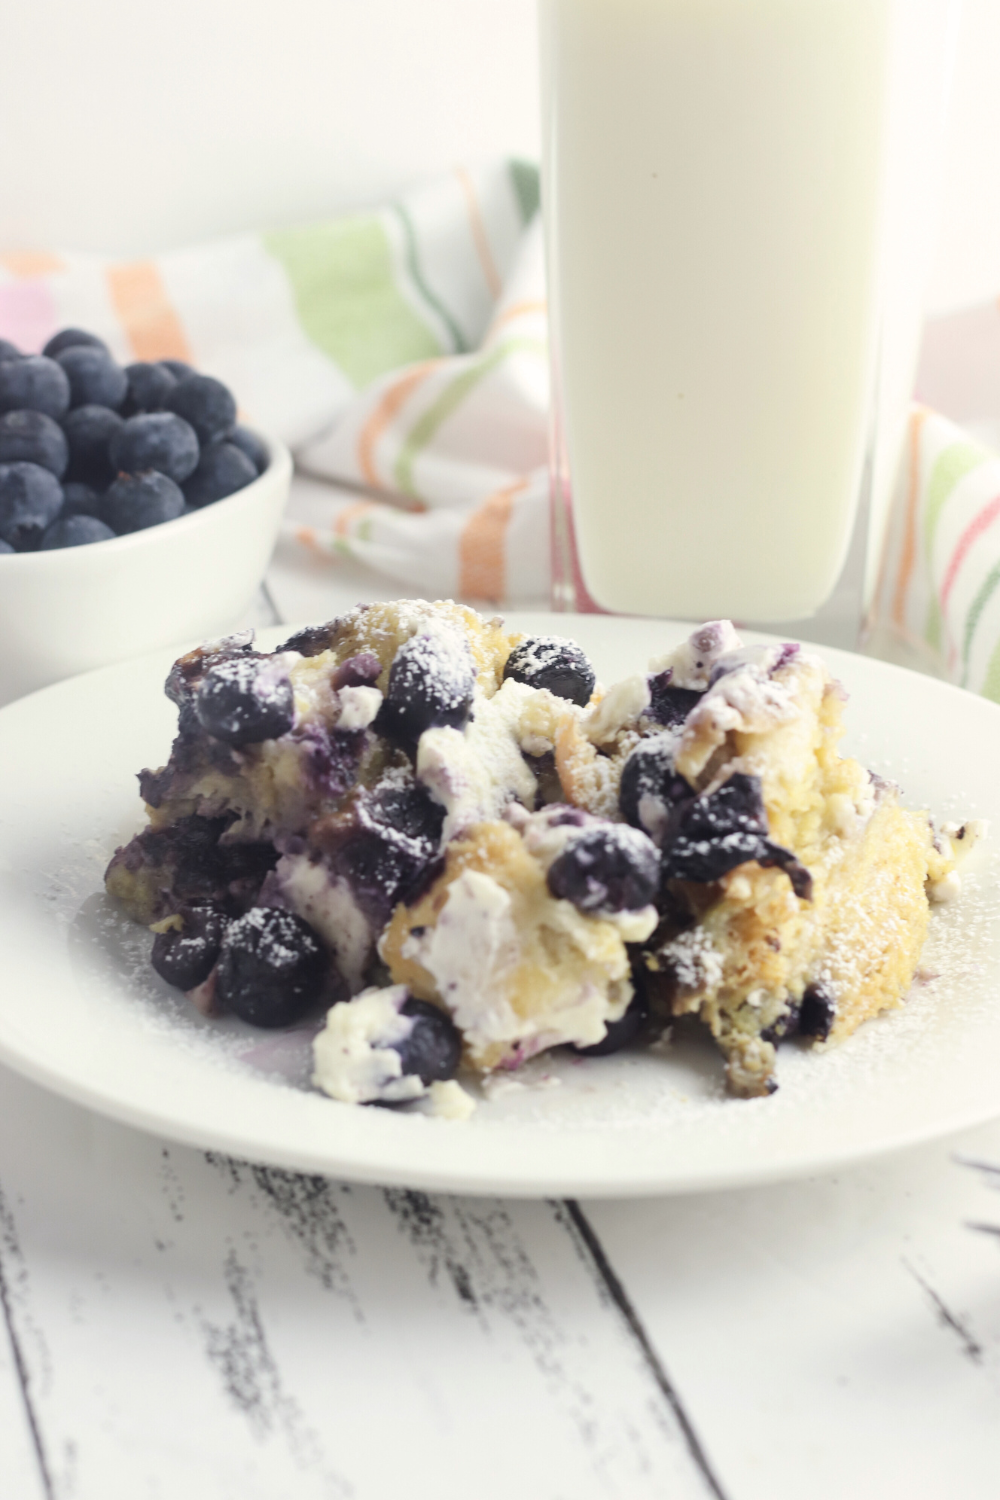 sideview of a delicious breakfast casserole with blueberries and a creamy cheese mixture.